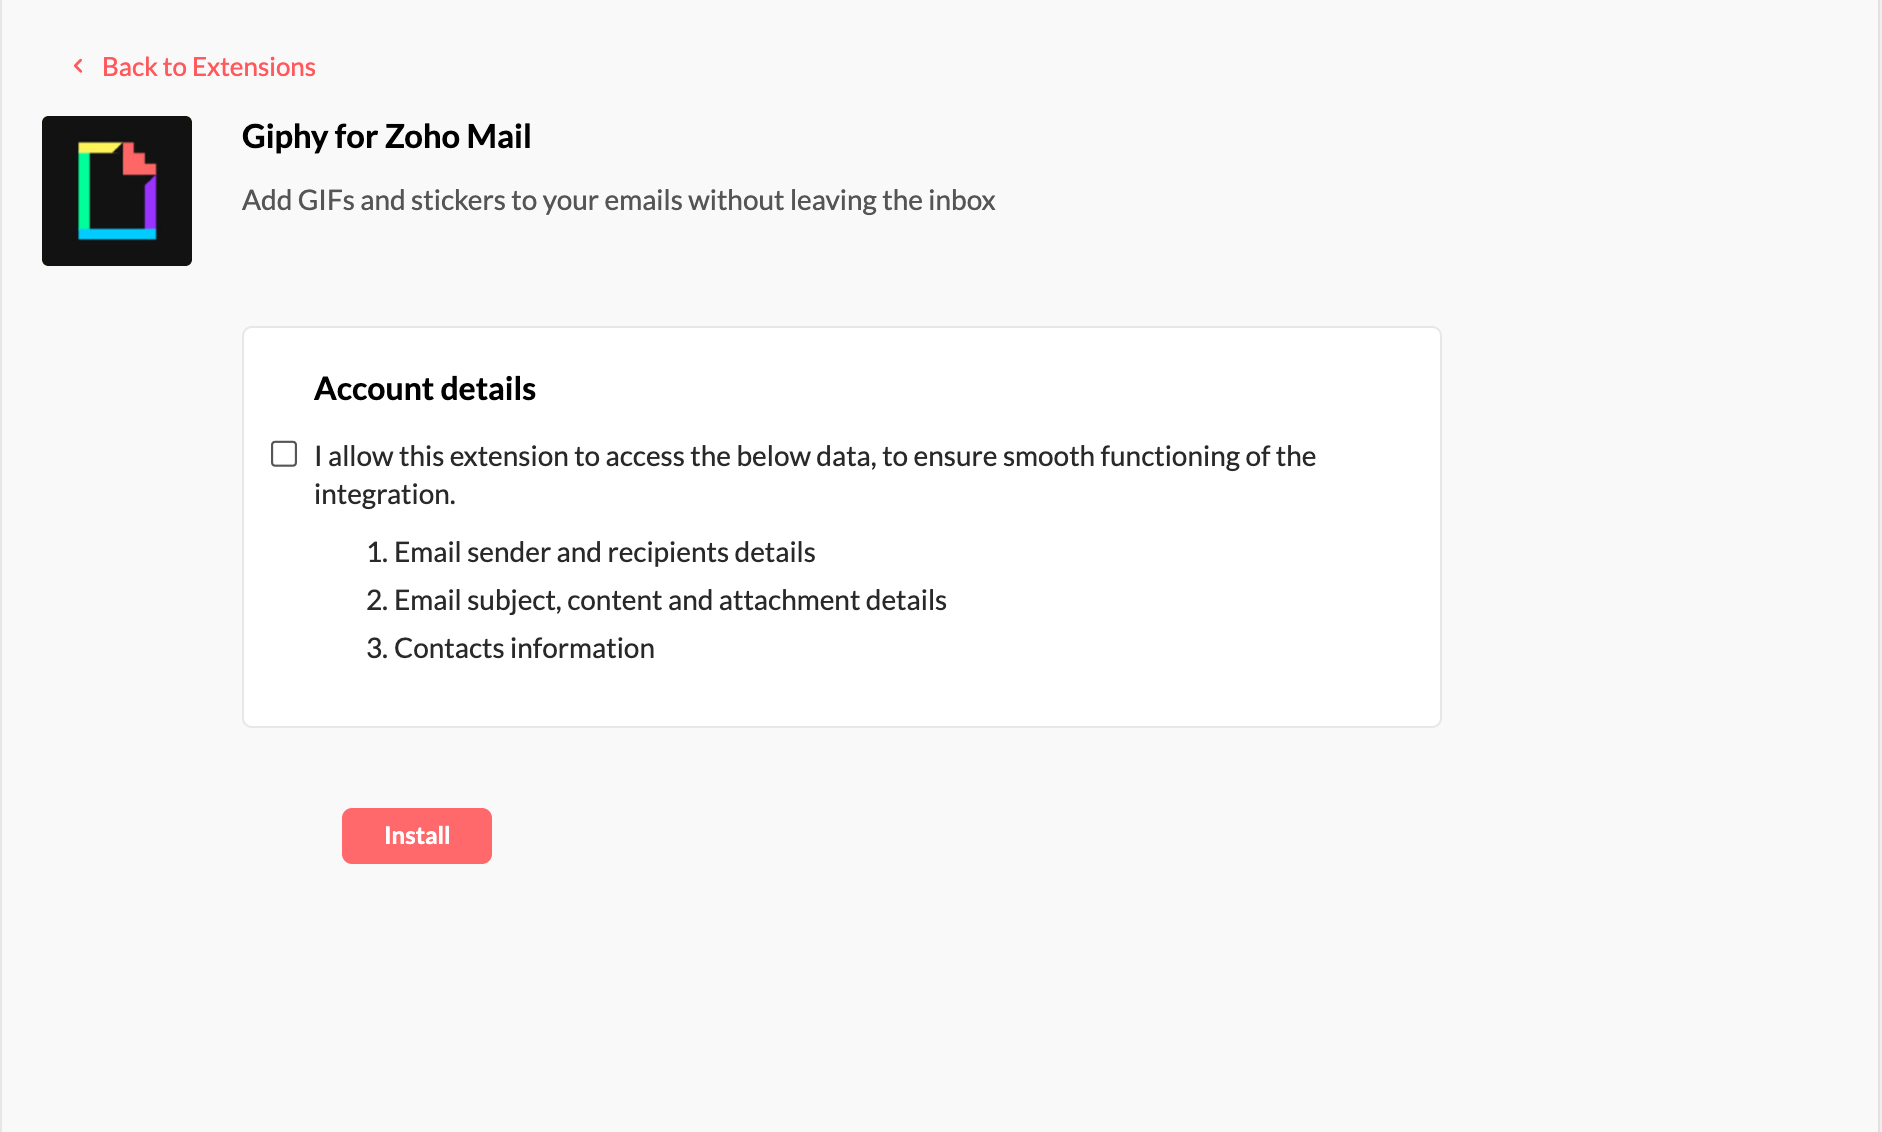 Giphy for Zoho Mail